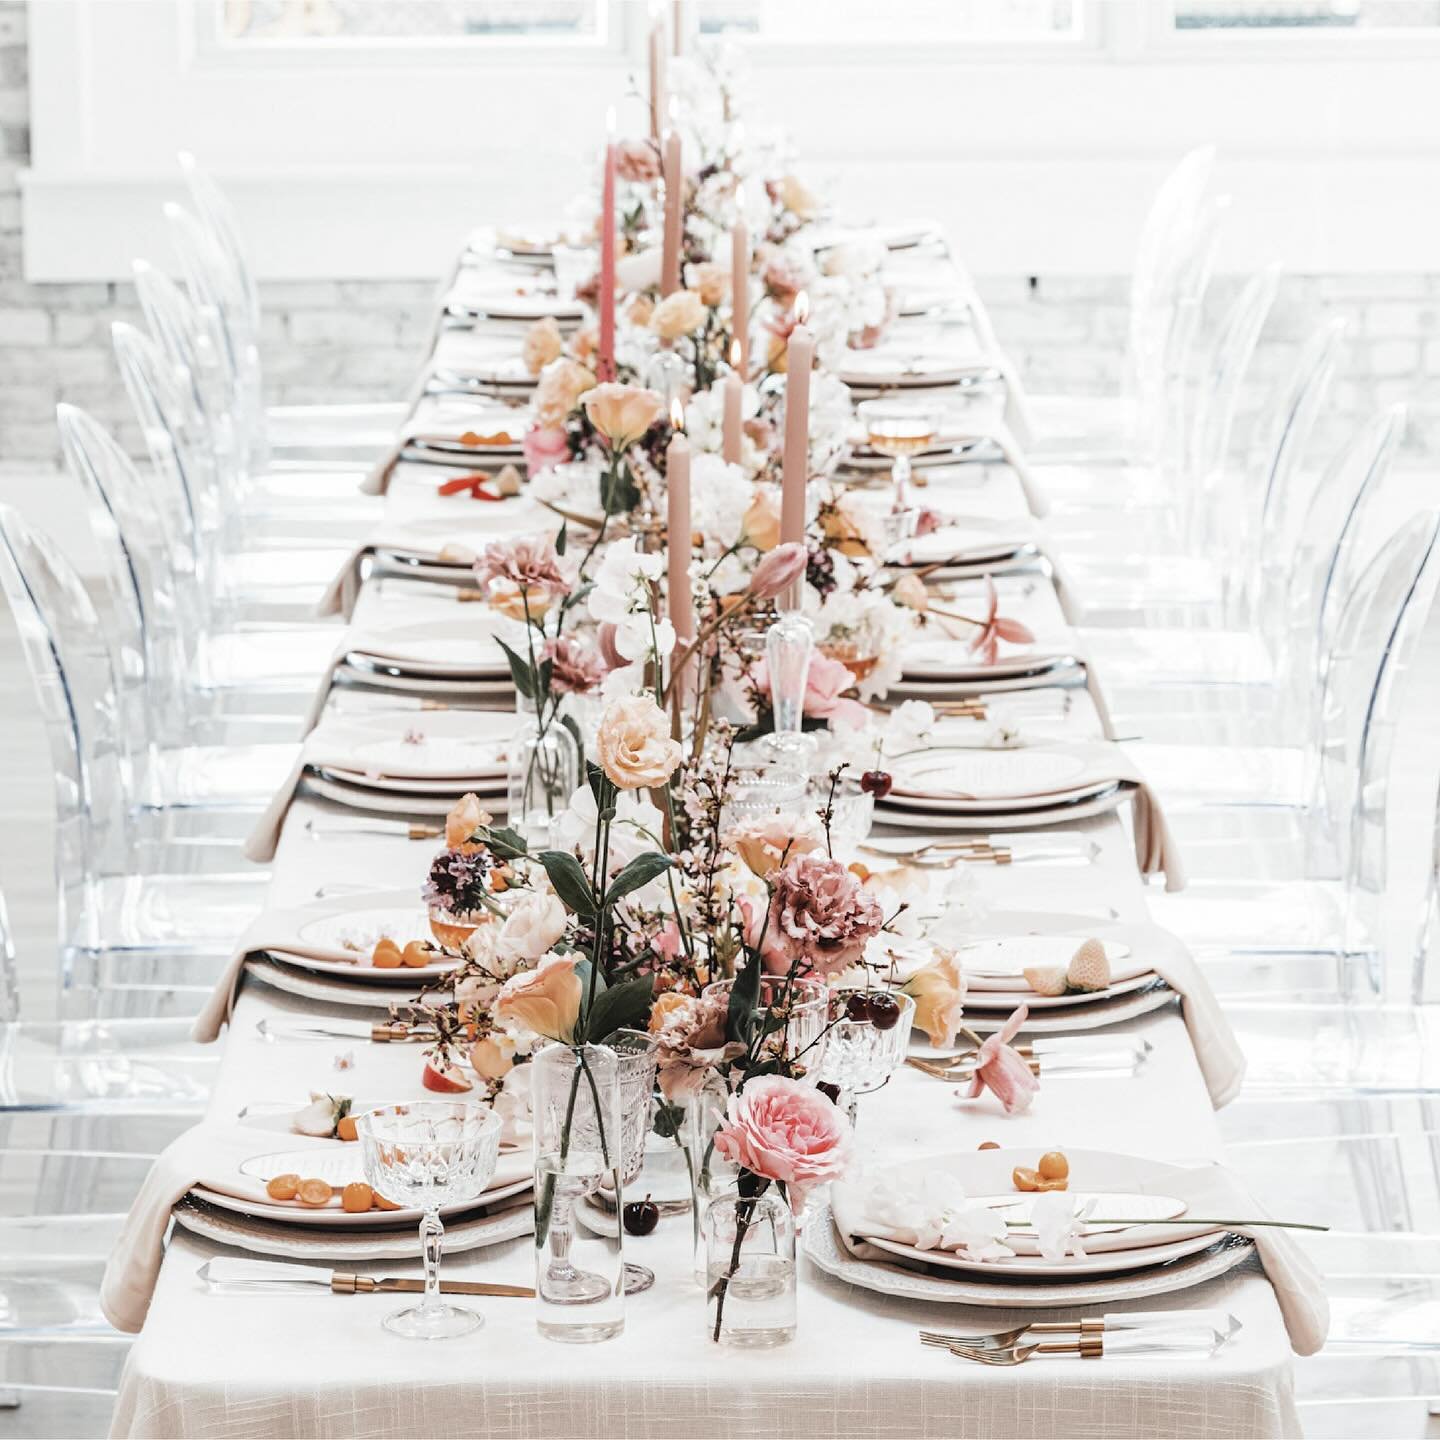 At The Huntington Loft, anything you could possibly think of, we can make happen. 

What is your vision? 

Photo @sbphotography.nyc 
Florals @florist.song
Rentals @tabletalkrentals
Place settings @sonnydaysstudio 

#thehuntingtonloft #eventspace #hun